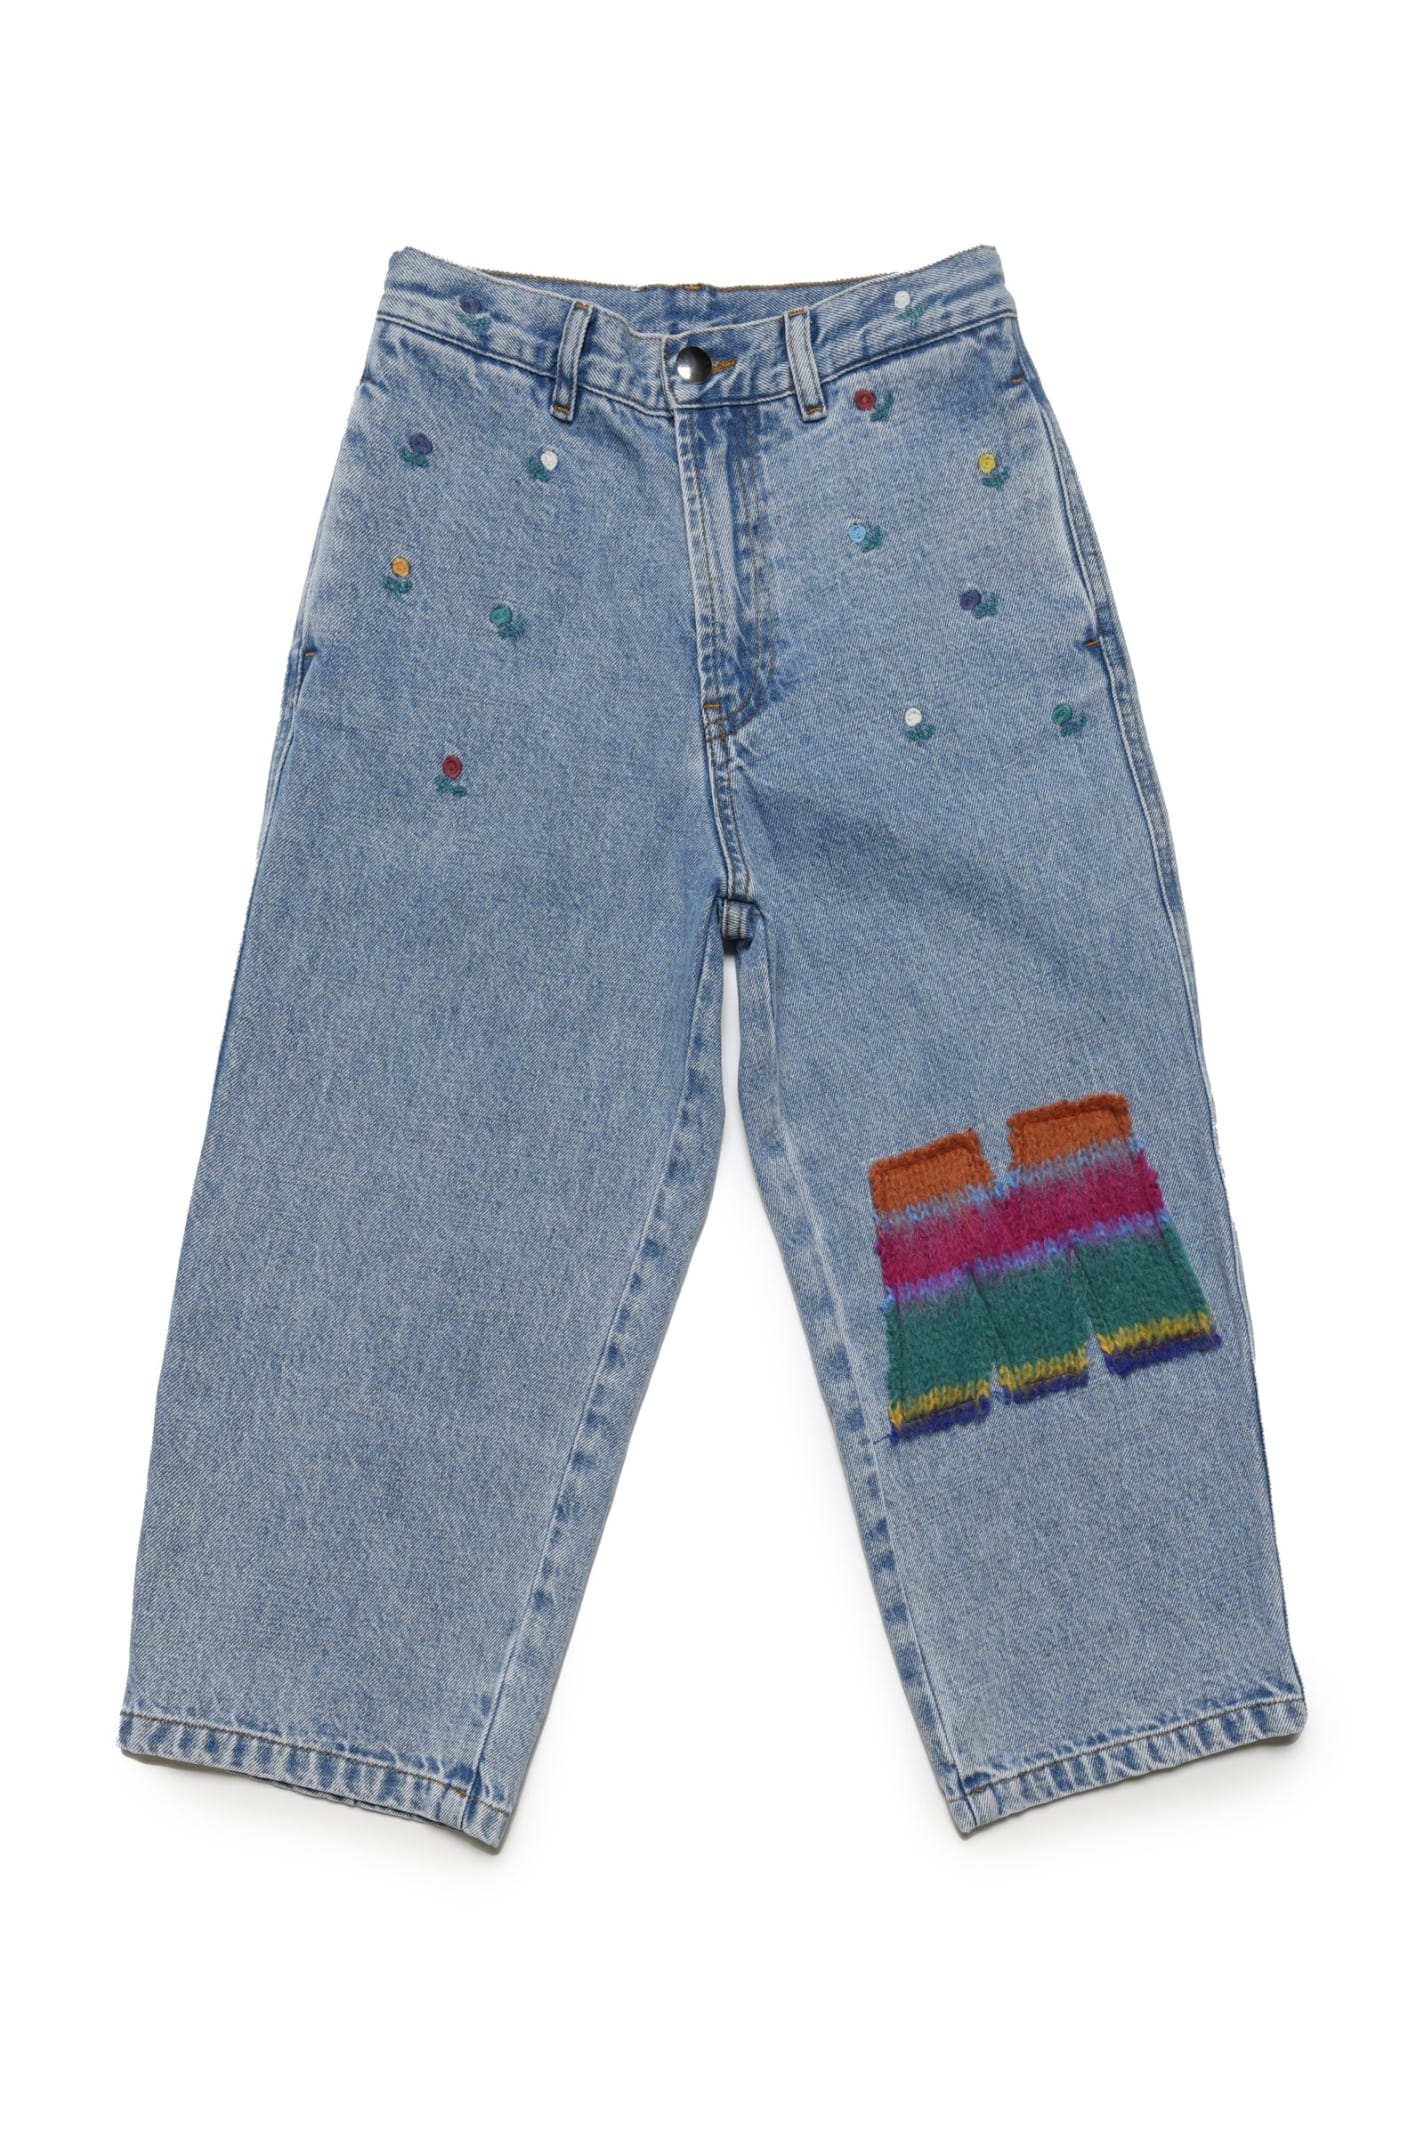 MARNI MP121F TROUSERS MARNI LIGHT BLUE JEANS PANTS WITH EMBROIDERED FLOWERS AND PATCHES